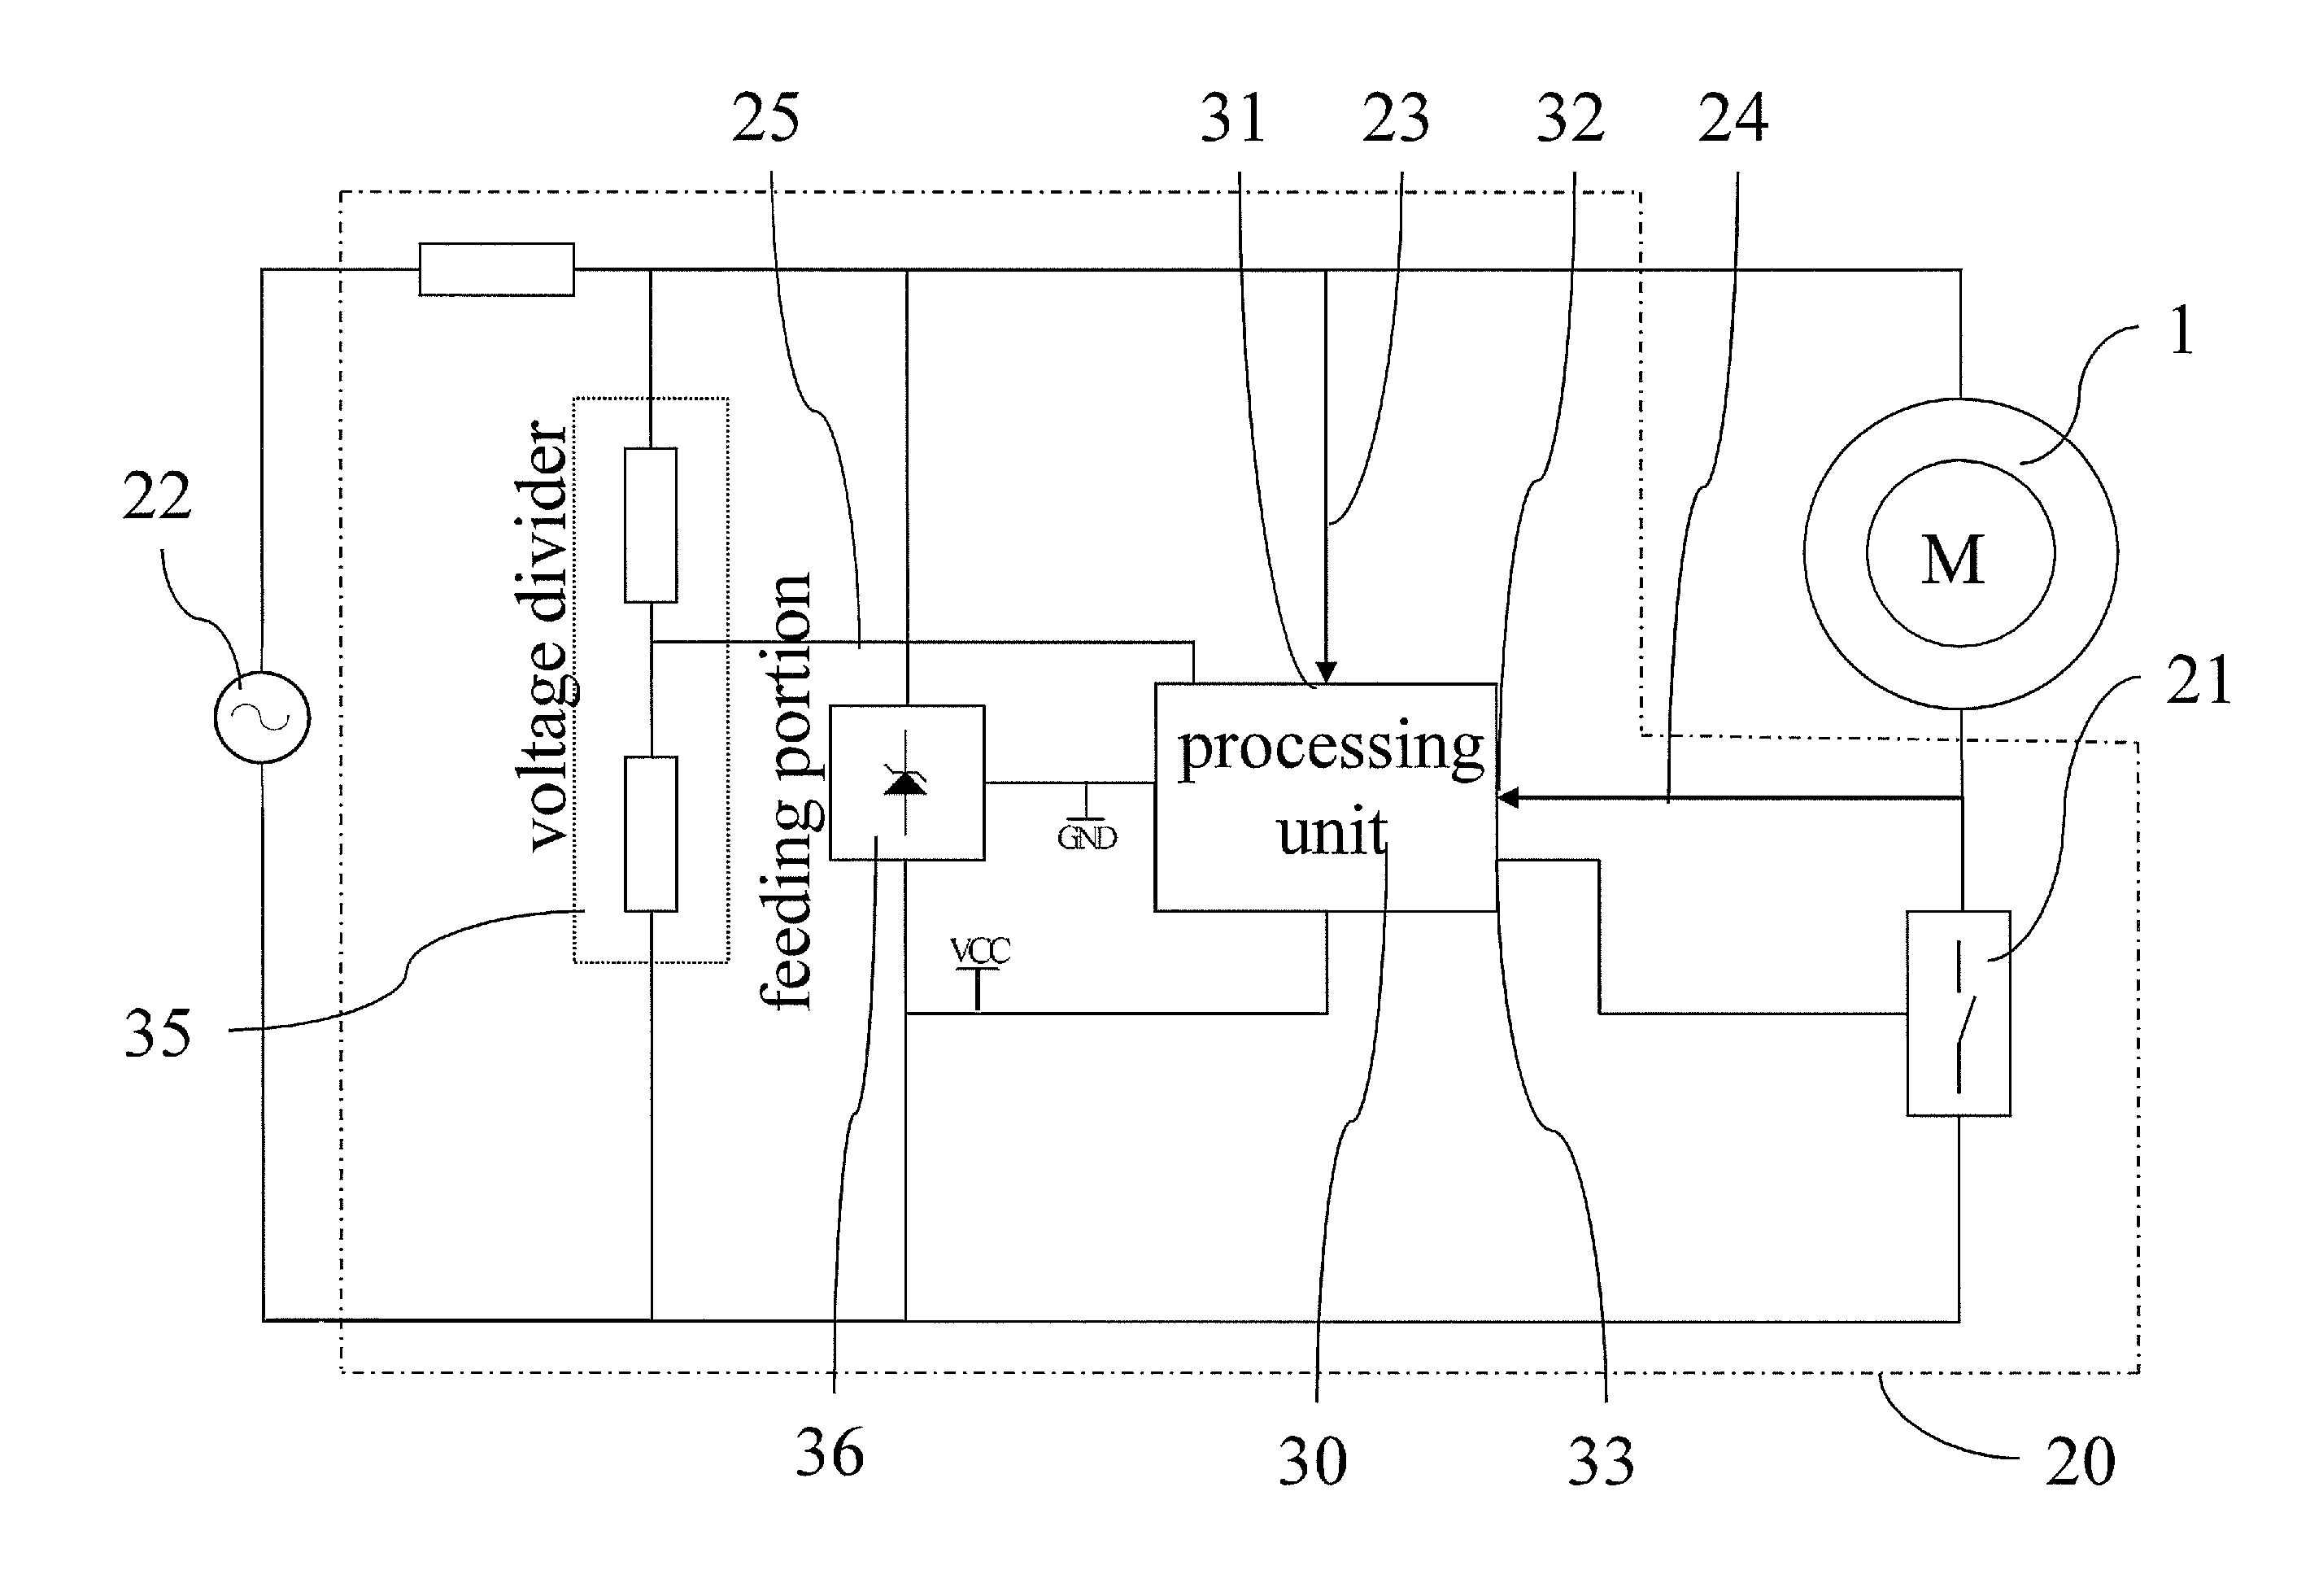 Method for starting a permanent magnet single-phase synchronous electric motor and electronic device for implementing said method